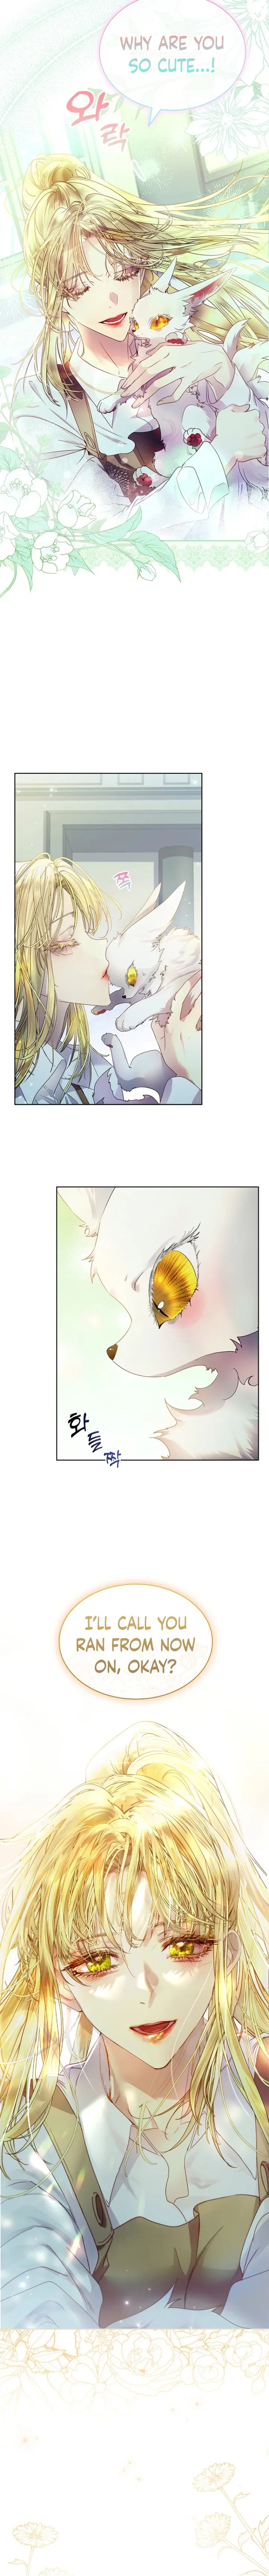 I Raised the Nine – Tailed Fox Wrongly chapter 7